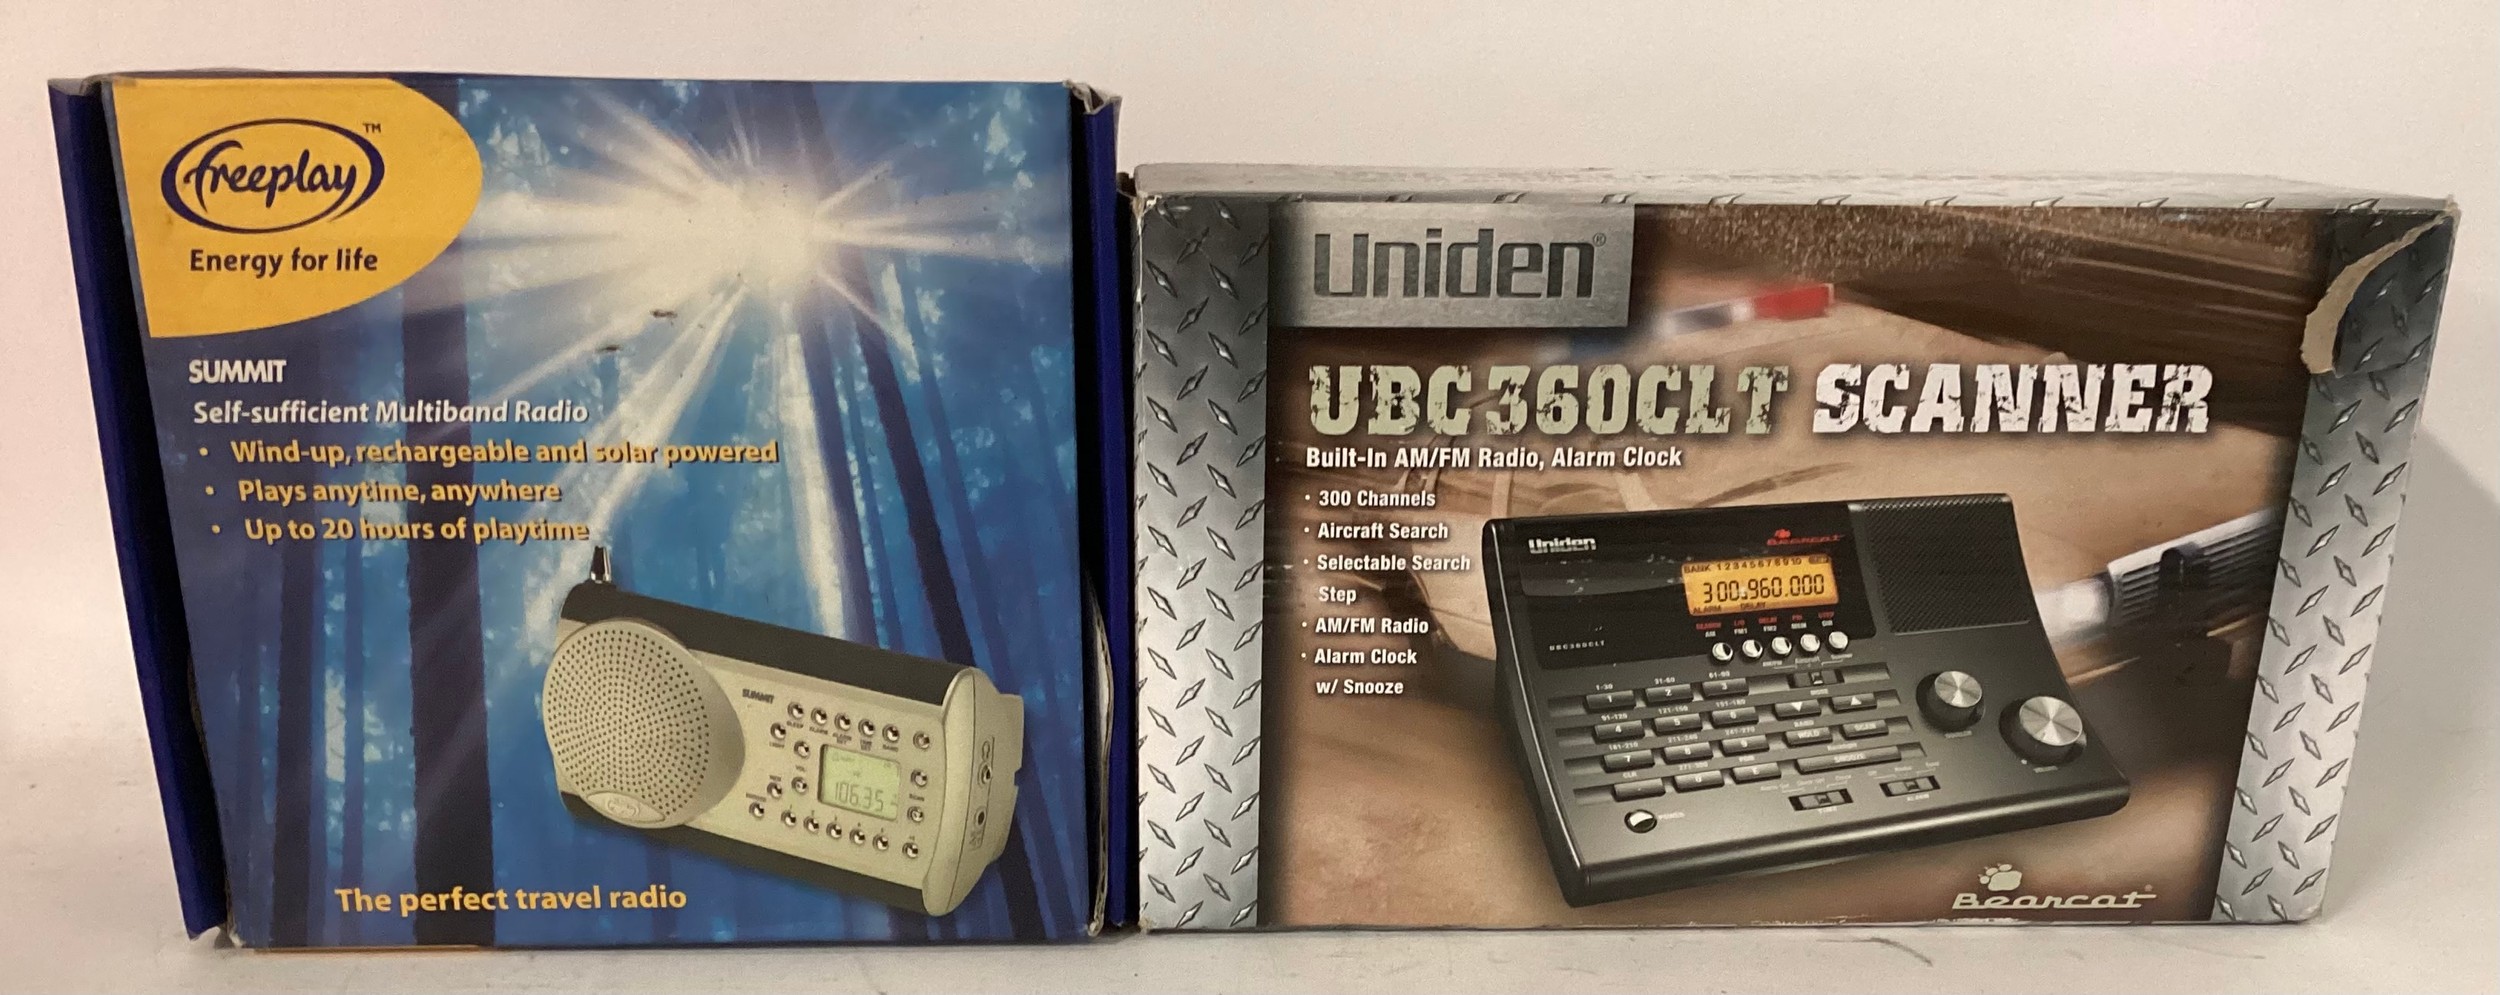 BOXED RADIO & SCANNER. Here we have a wind-up solar powered radio and a Uniden Scanner No. UBC-